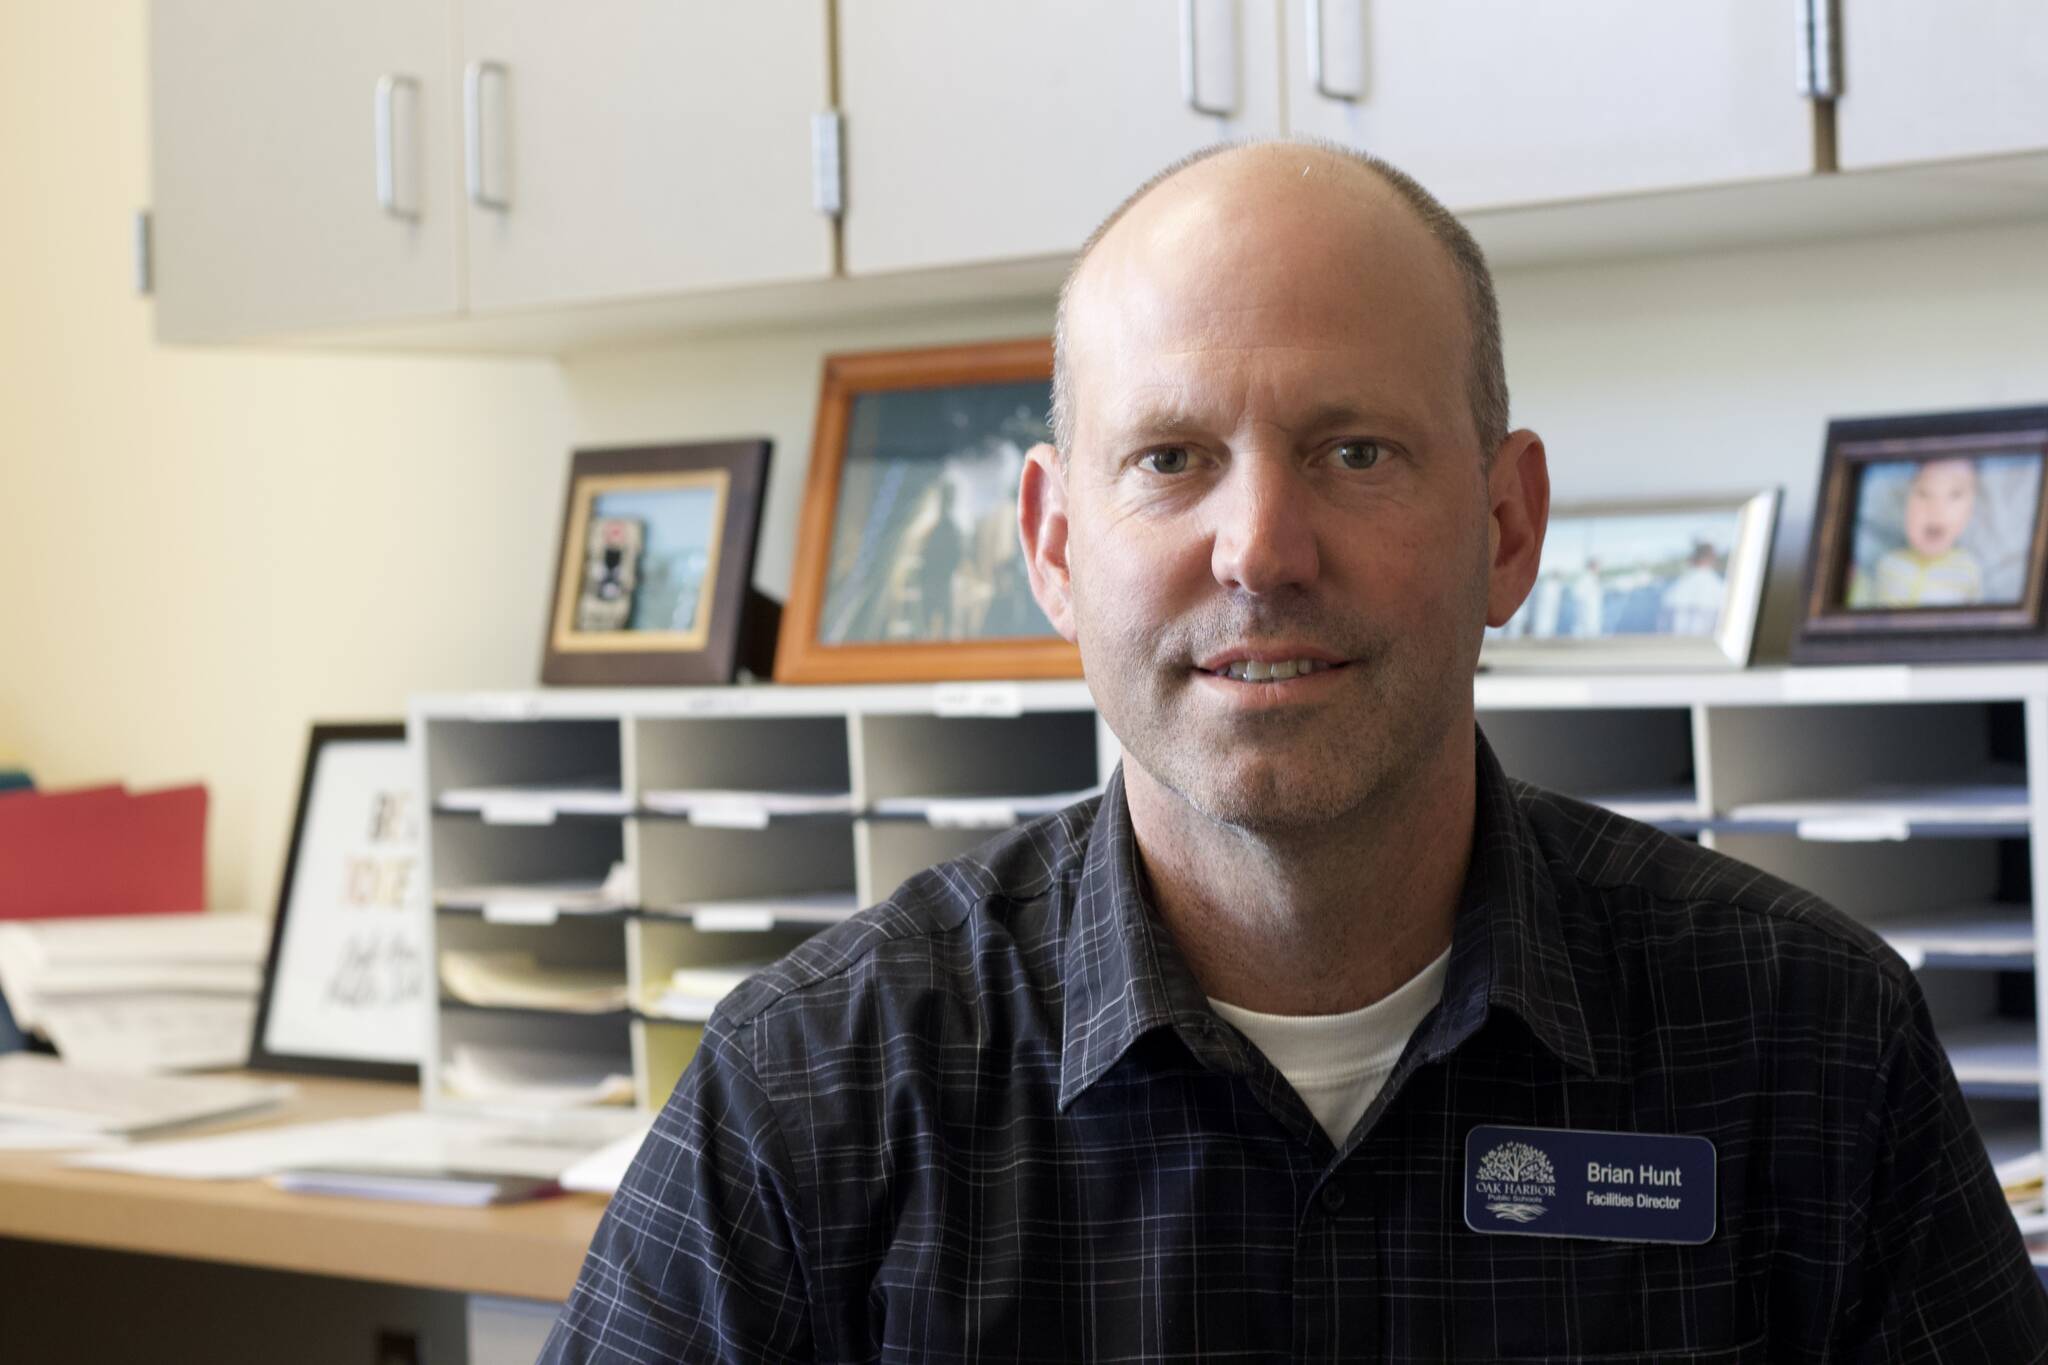 Brian Hunt, Facilities Director for the Oak Harbor School District. (Photo by Rachel Rosen/Whidbey News-Times)